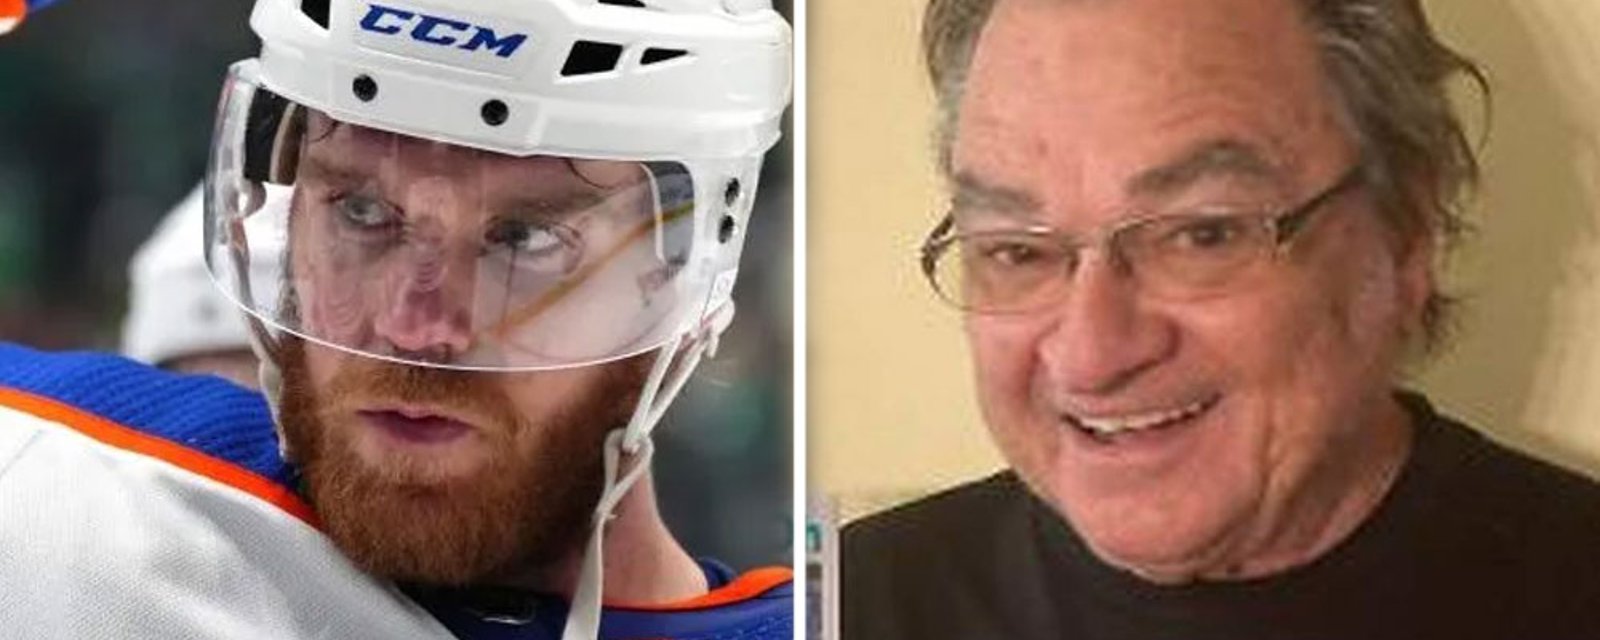 Florida reporter goes off on McDavid, calls him “McOverrated”